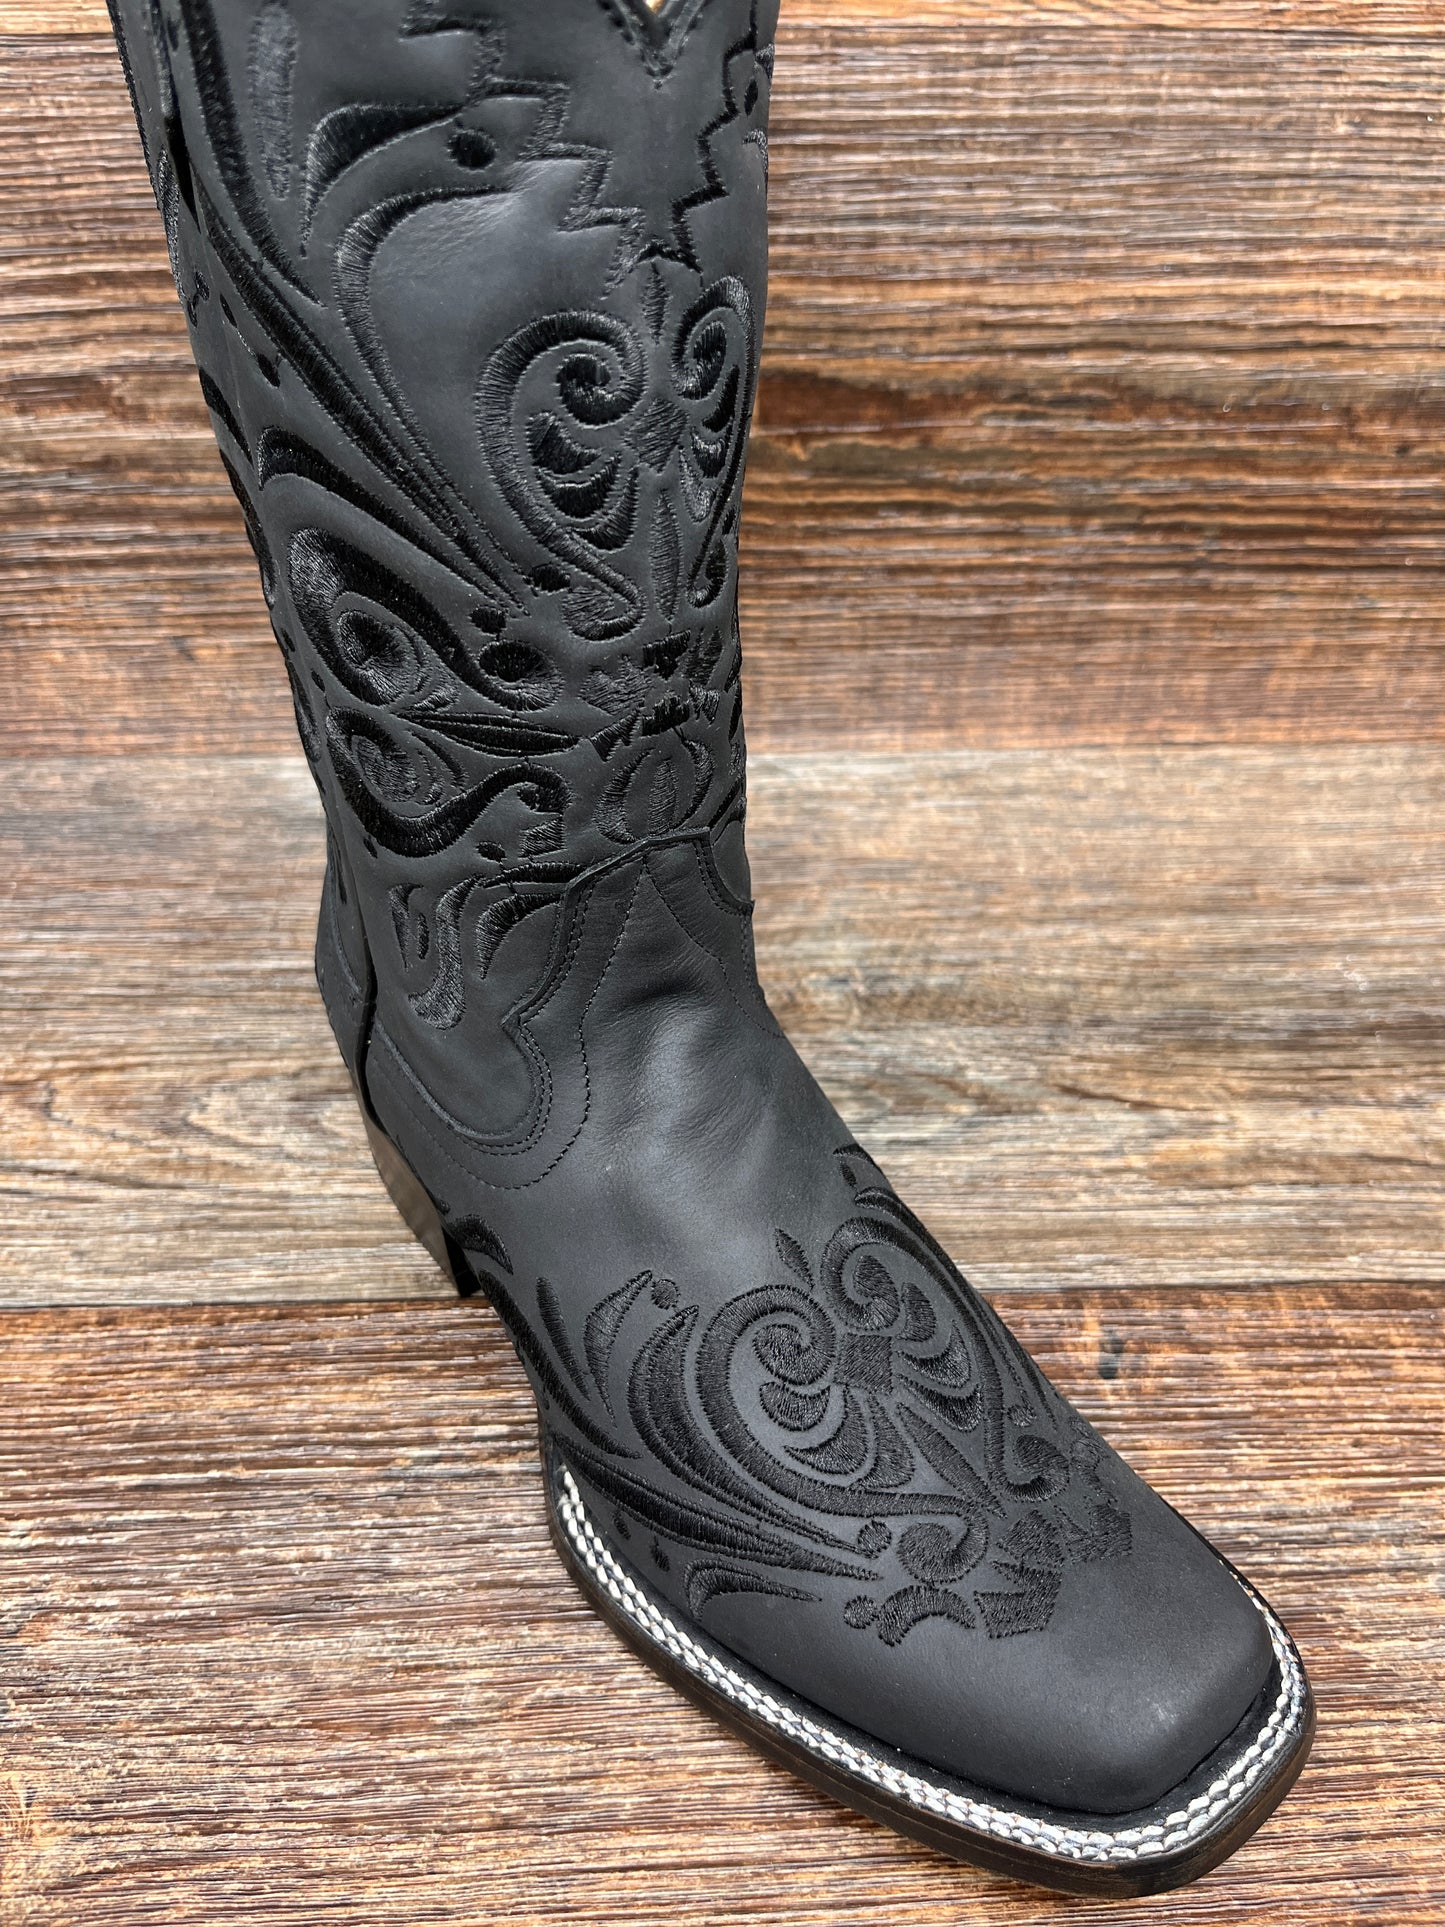 l5464 Women's Circle-G Black Filigree Square Toe Western Boot by Corral